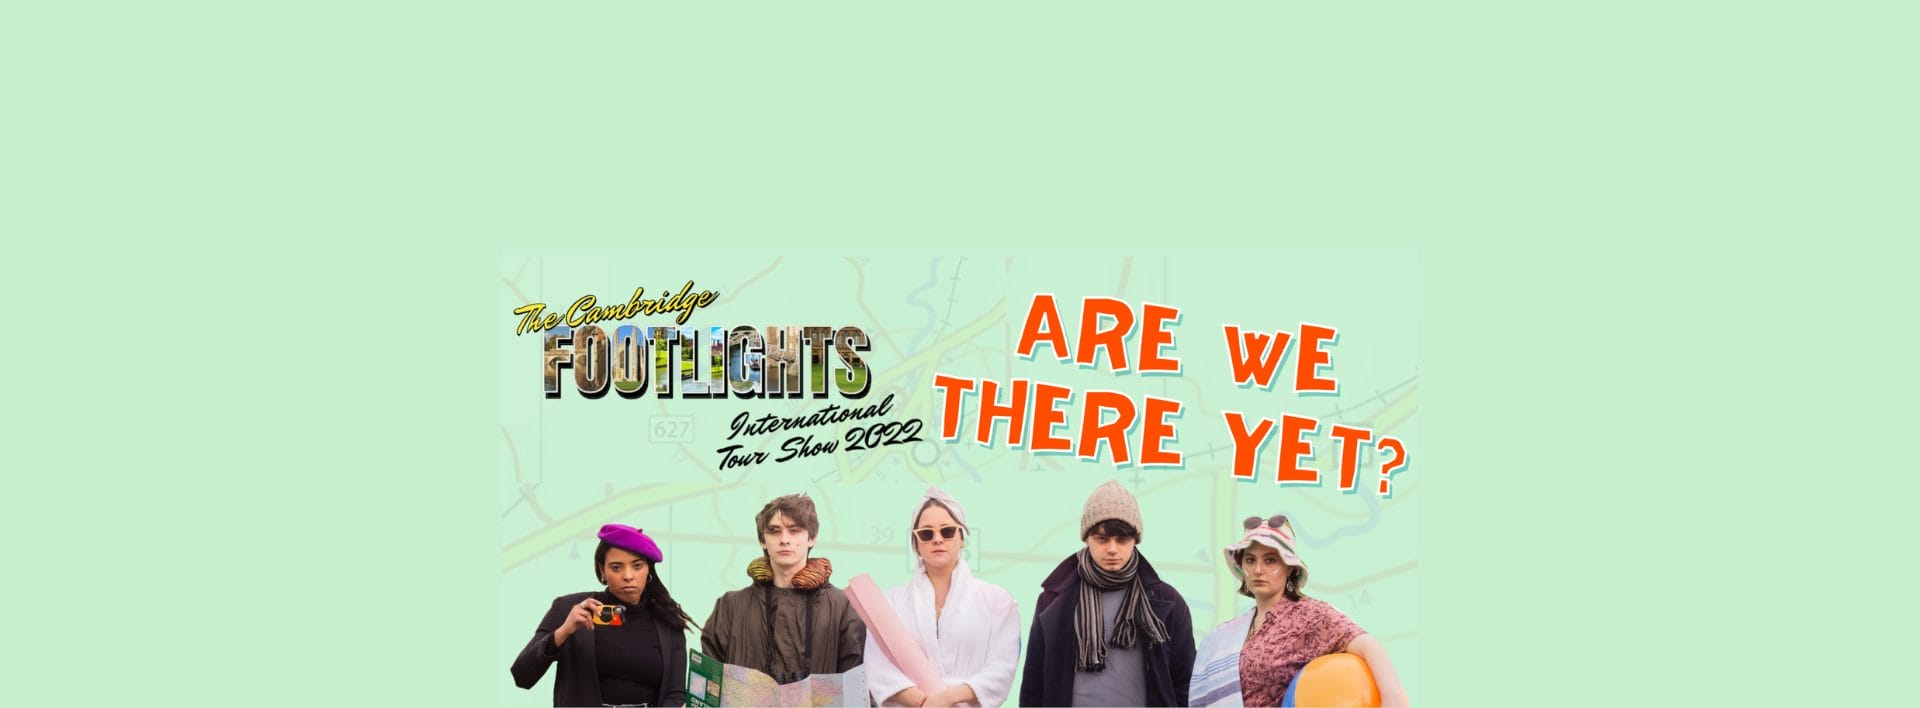 The Cambridge Footlights International Tour Show 2022: Are We There Yet?